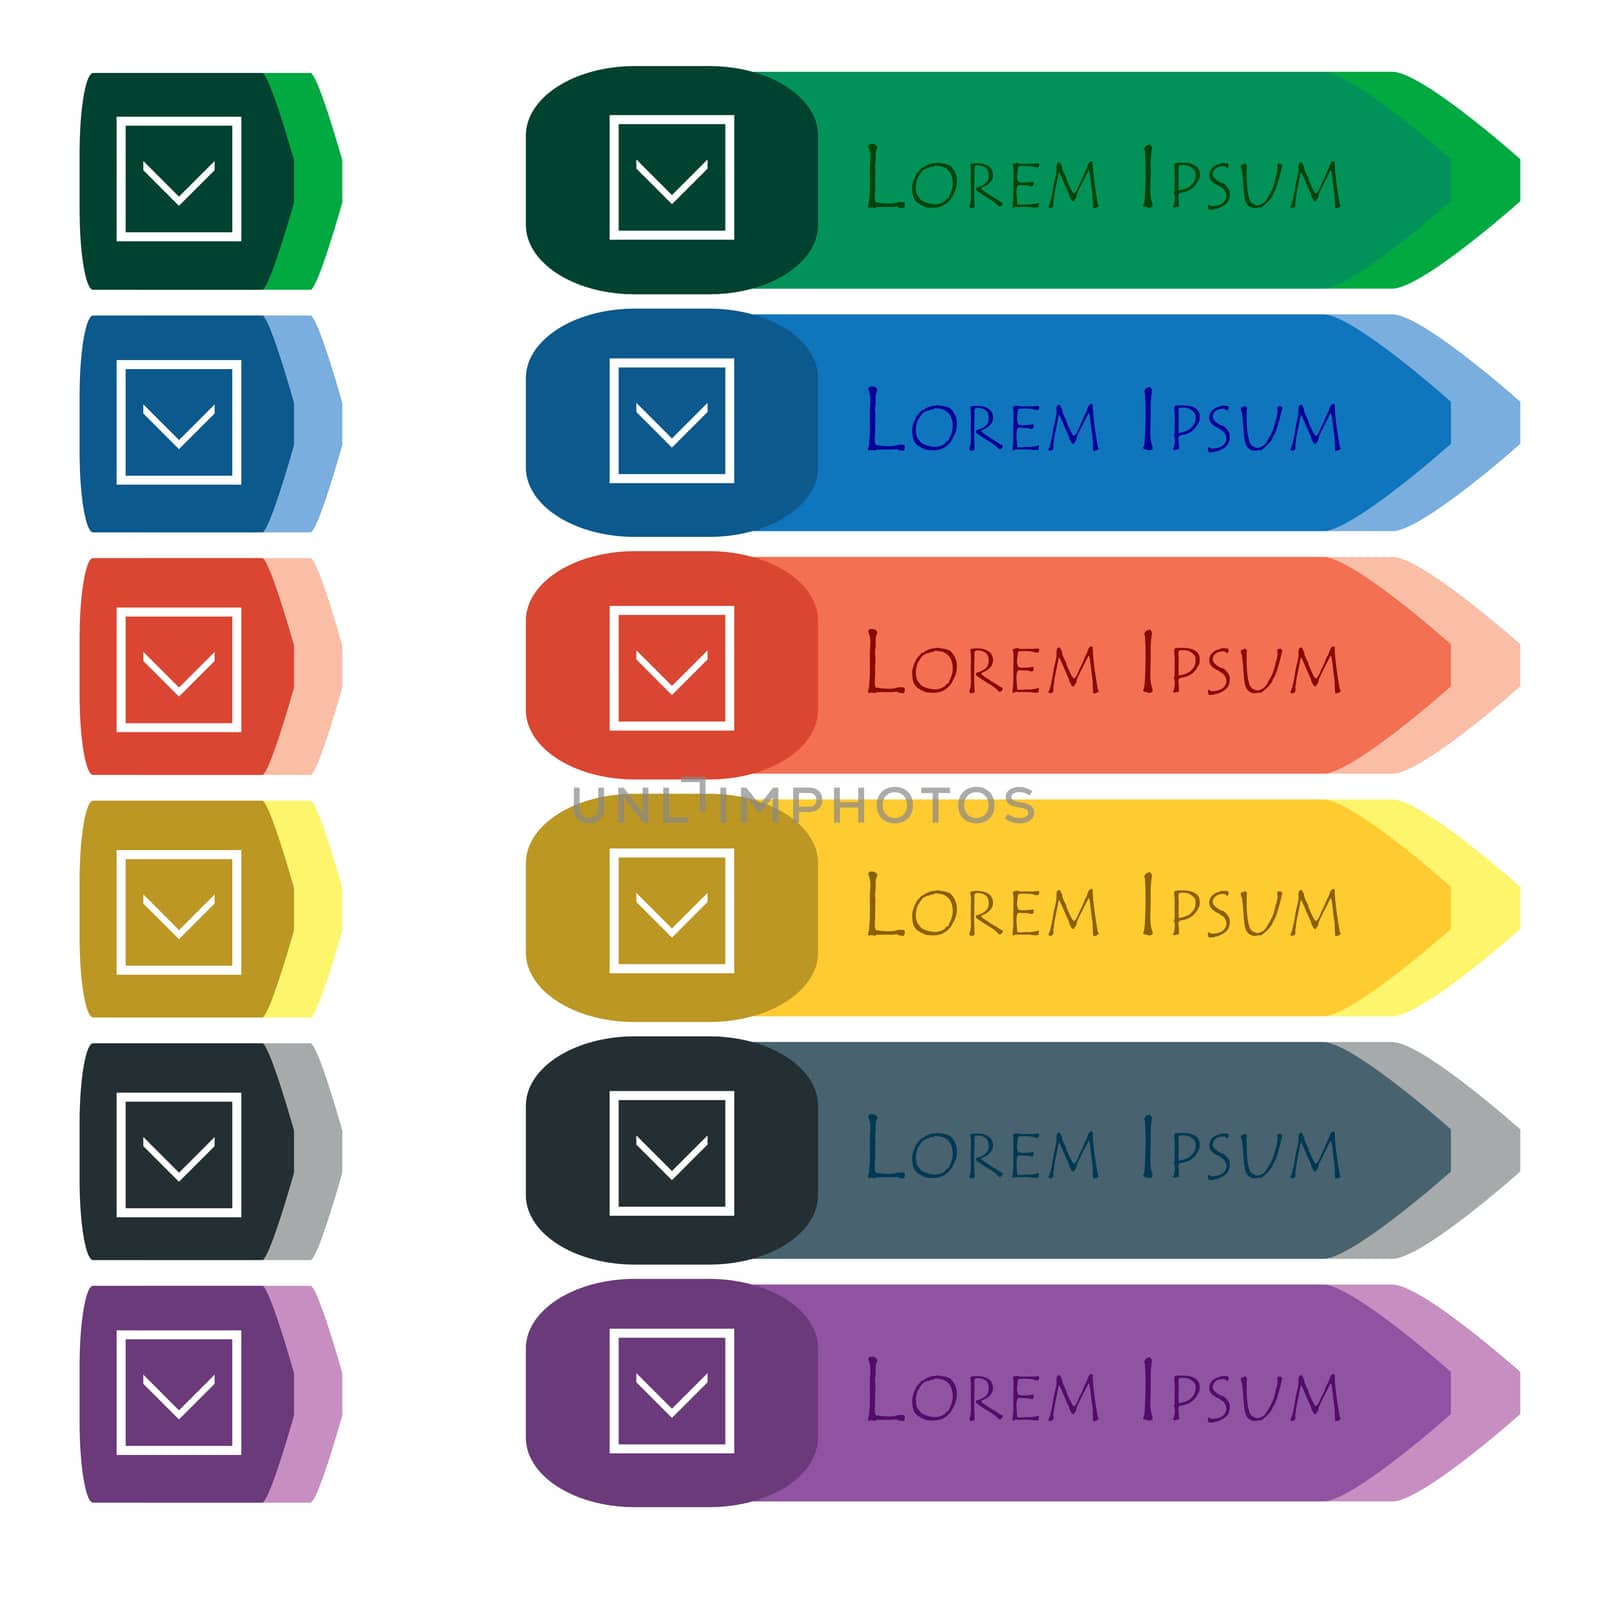 Arrow down, Download, Load, Backup icon sign. Set of colorful, bright long buttons with additional small modules. Flat design. 